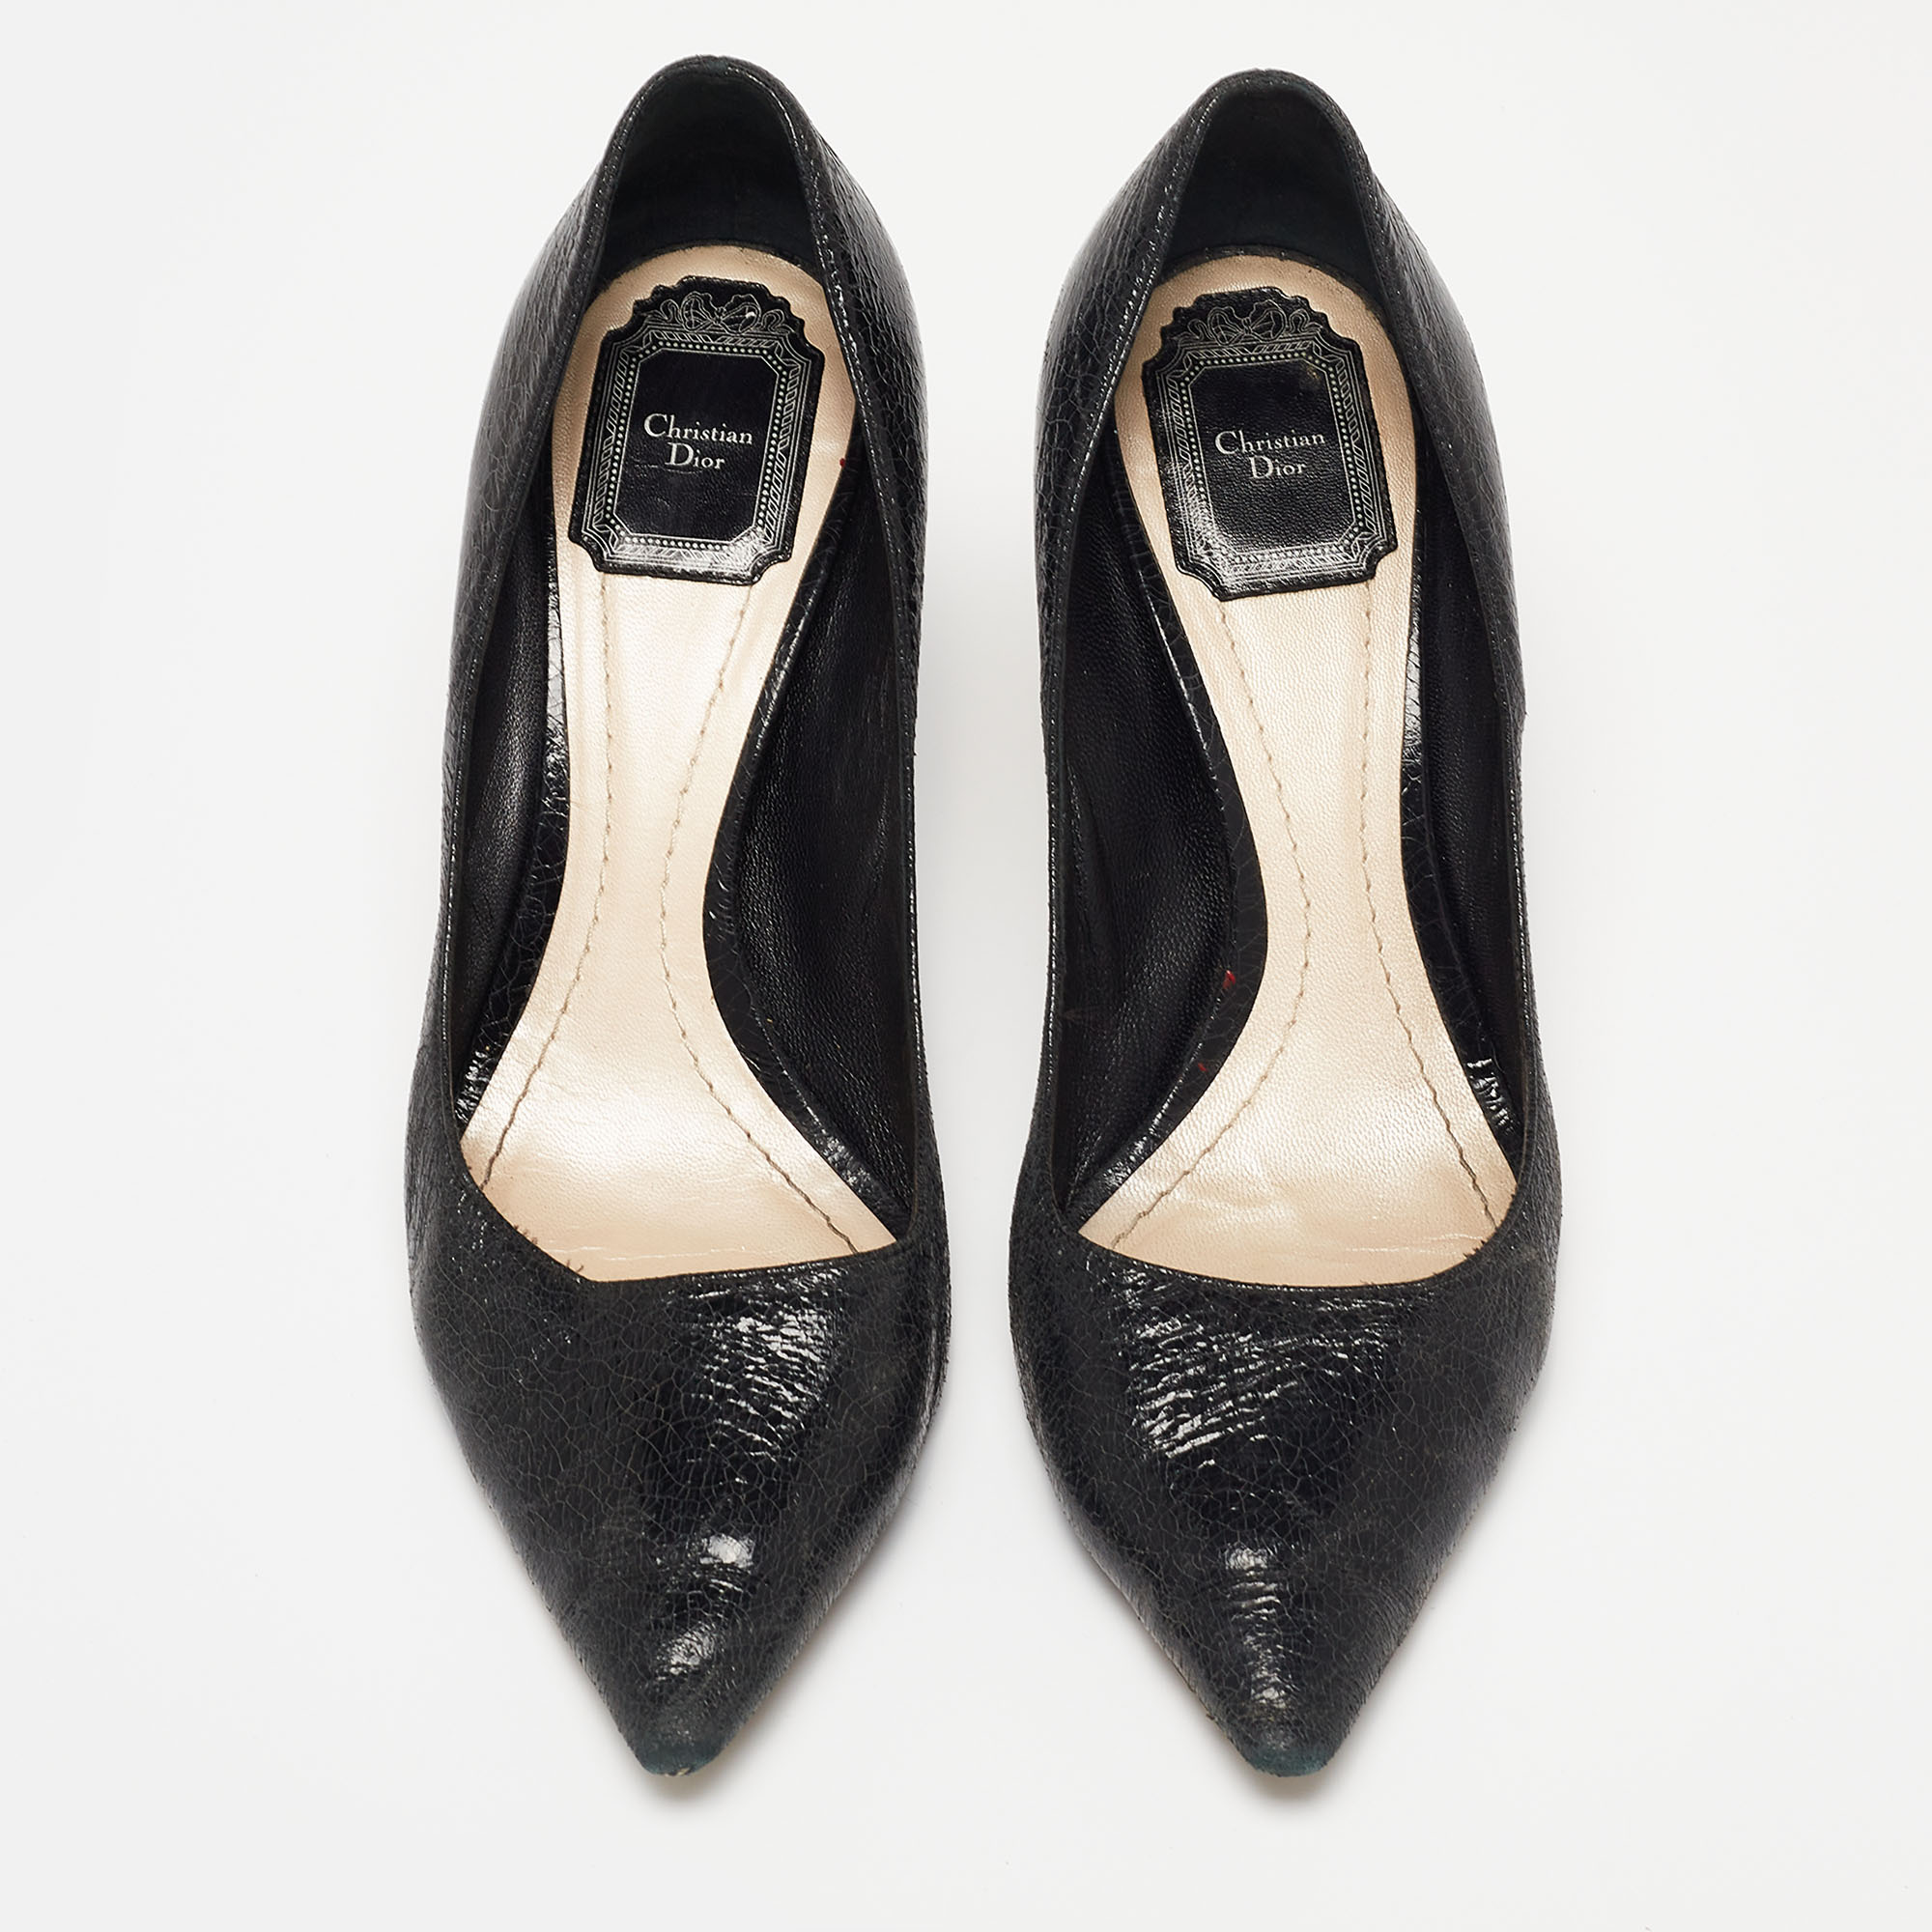 Dior Black Crackled Leather Pointed Toe Pumps Size 39